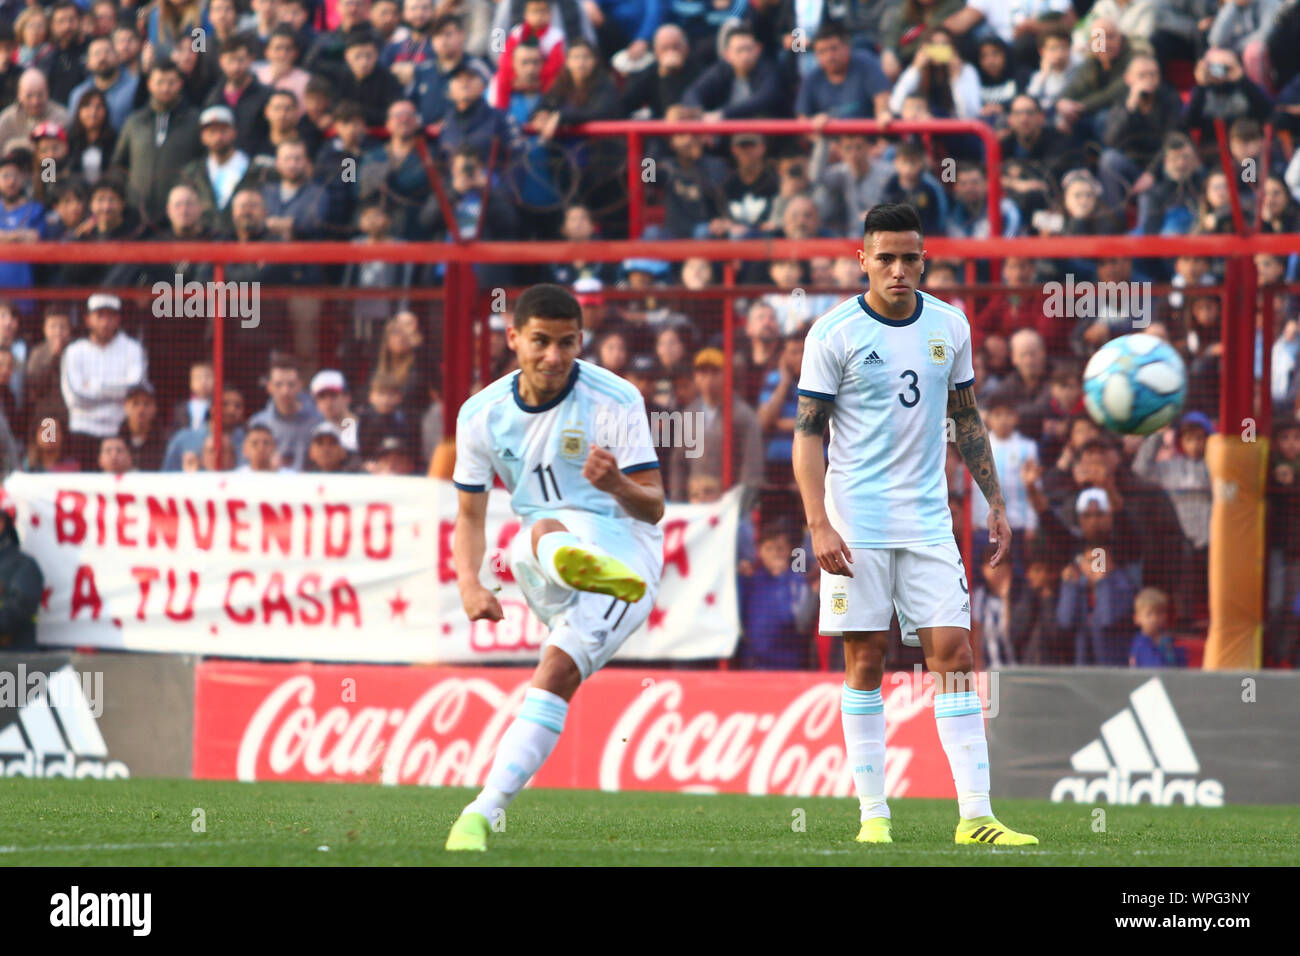 BUENOS AIRES, 08.09.2019: Lucas Robertone during the match between Argentina and Colombia for friendly match on Diego Maradona Stadium in Buenos Aires Stock Photo